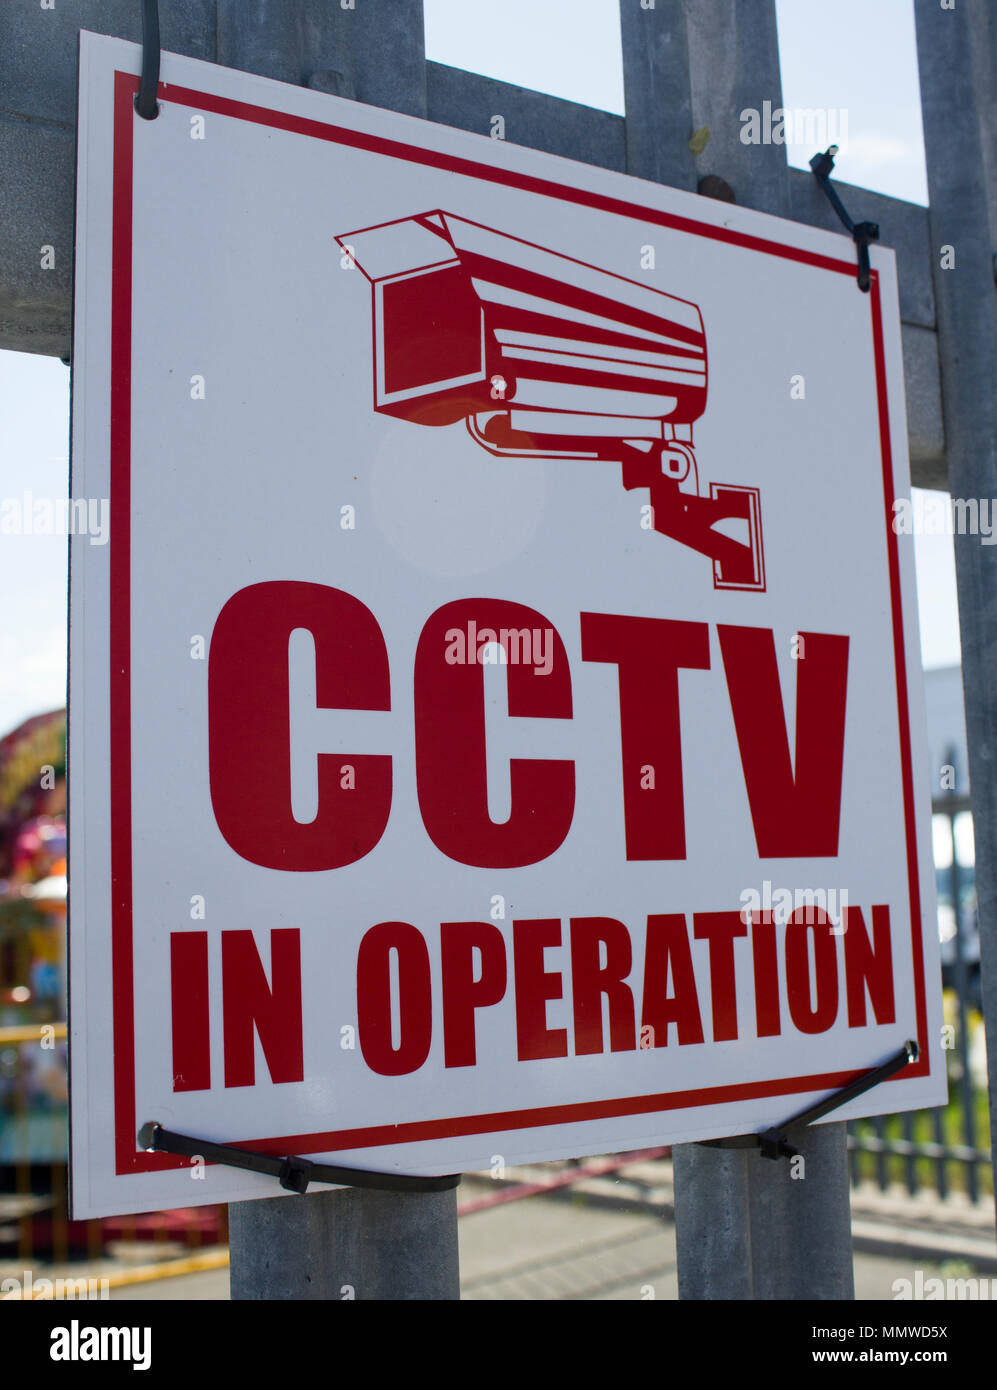 cctv red sign